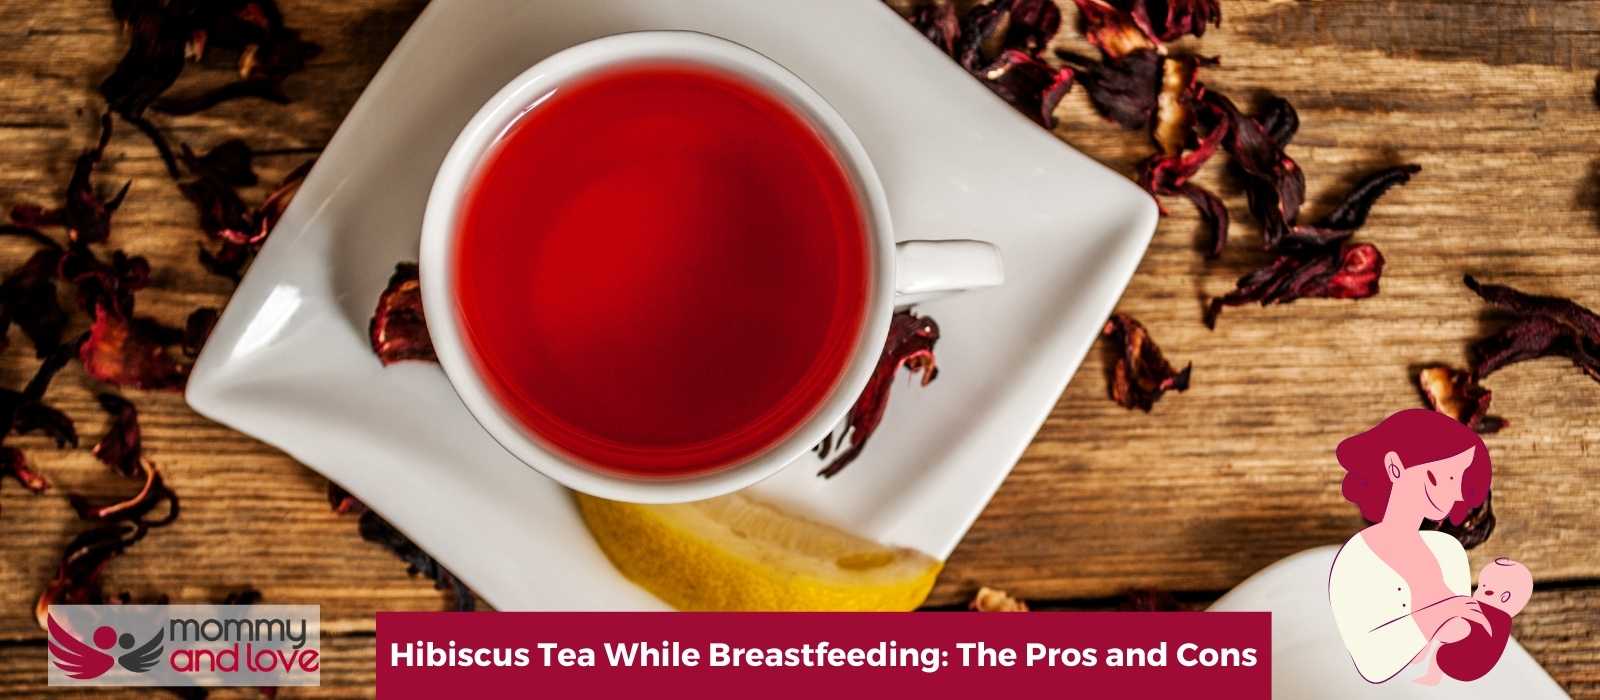 Hibiscus Tea While Breastfeeding The Pros and Cons